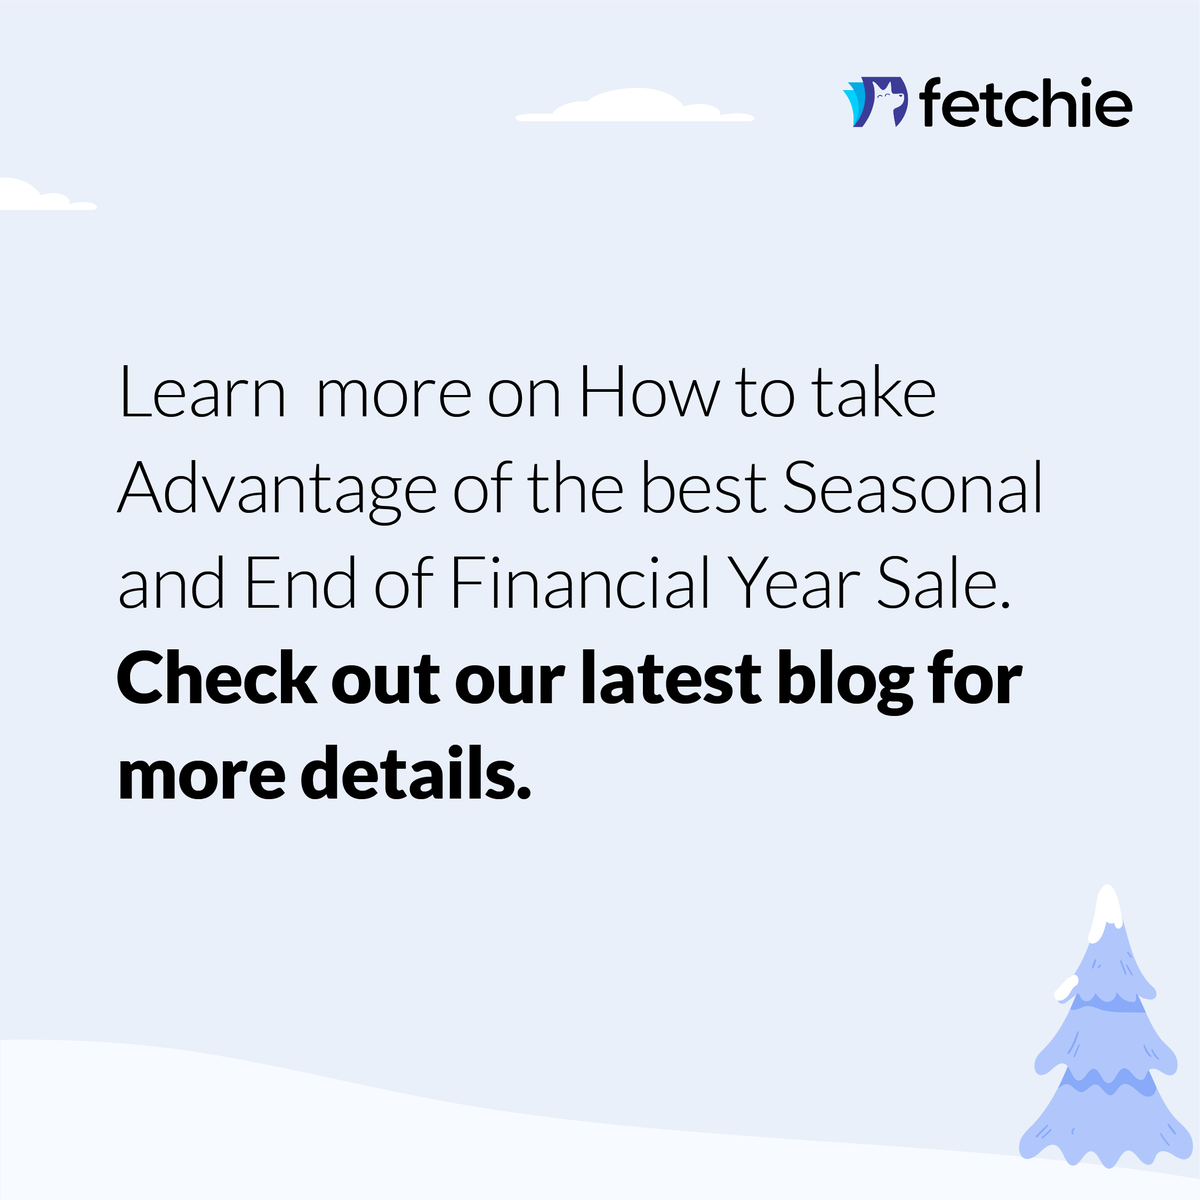 ❄️ Winter Sale Alert! 🛍️
🎉 Discover more chances to maximize your savings in our blog
 
#wintersale #sales #eofy #eofysale #discounts #offers #deals #onlinedeals #promocodes #savemoney #shopping #onlineshopping #savingtips #shoppingtips #budget #budgeting #tips